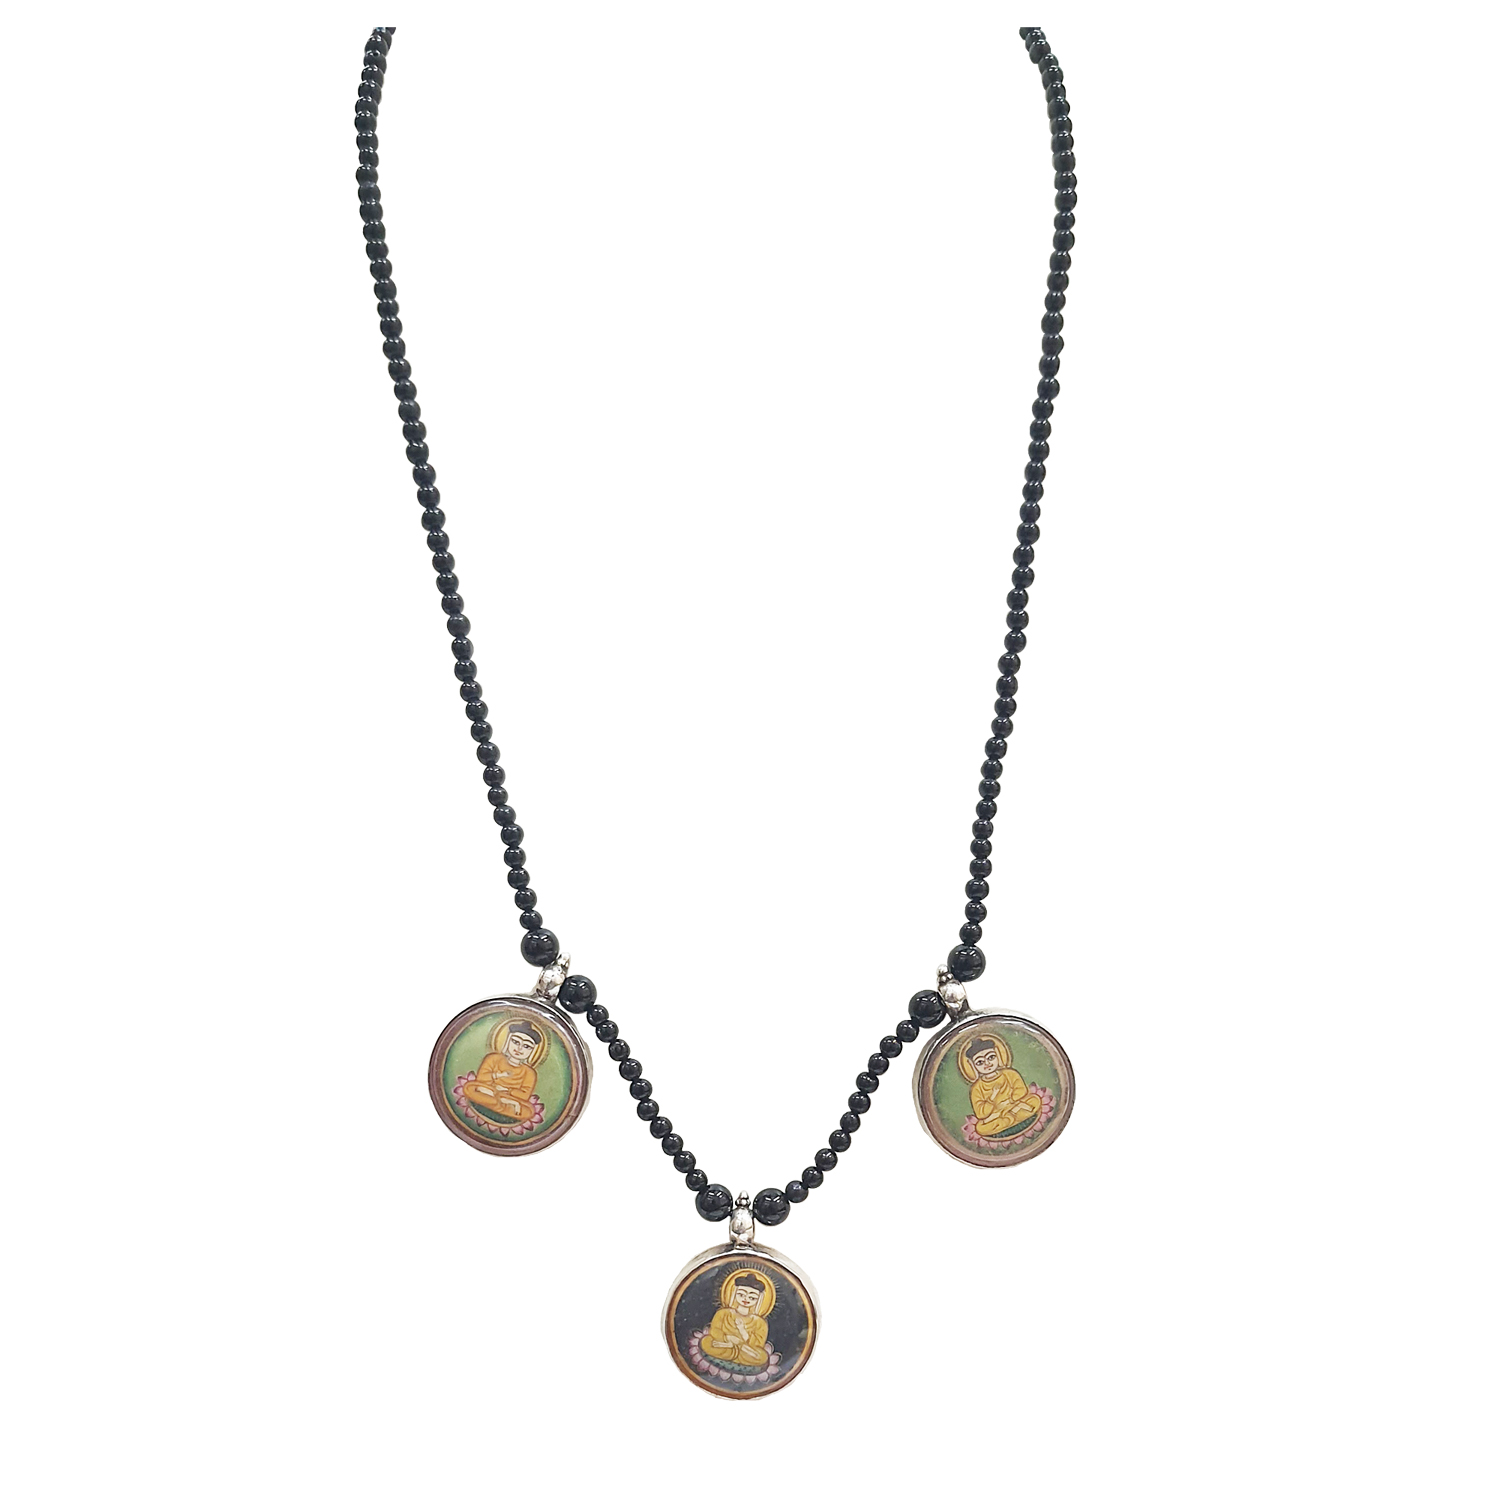 Wear Your Faith with Grace: The Exquisite Mahavir Pendant Set in Black Onyx Necklace (SN1088)